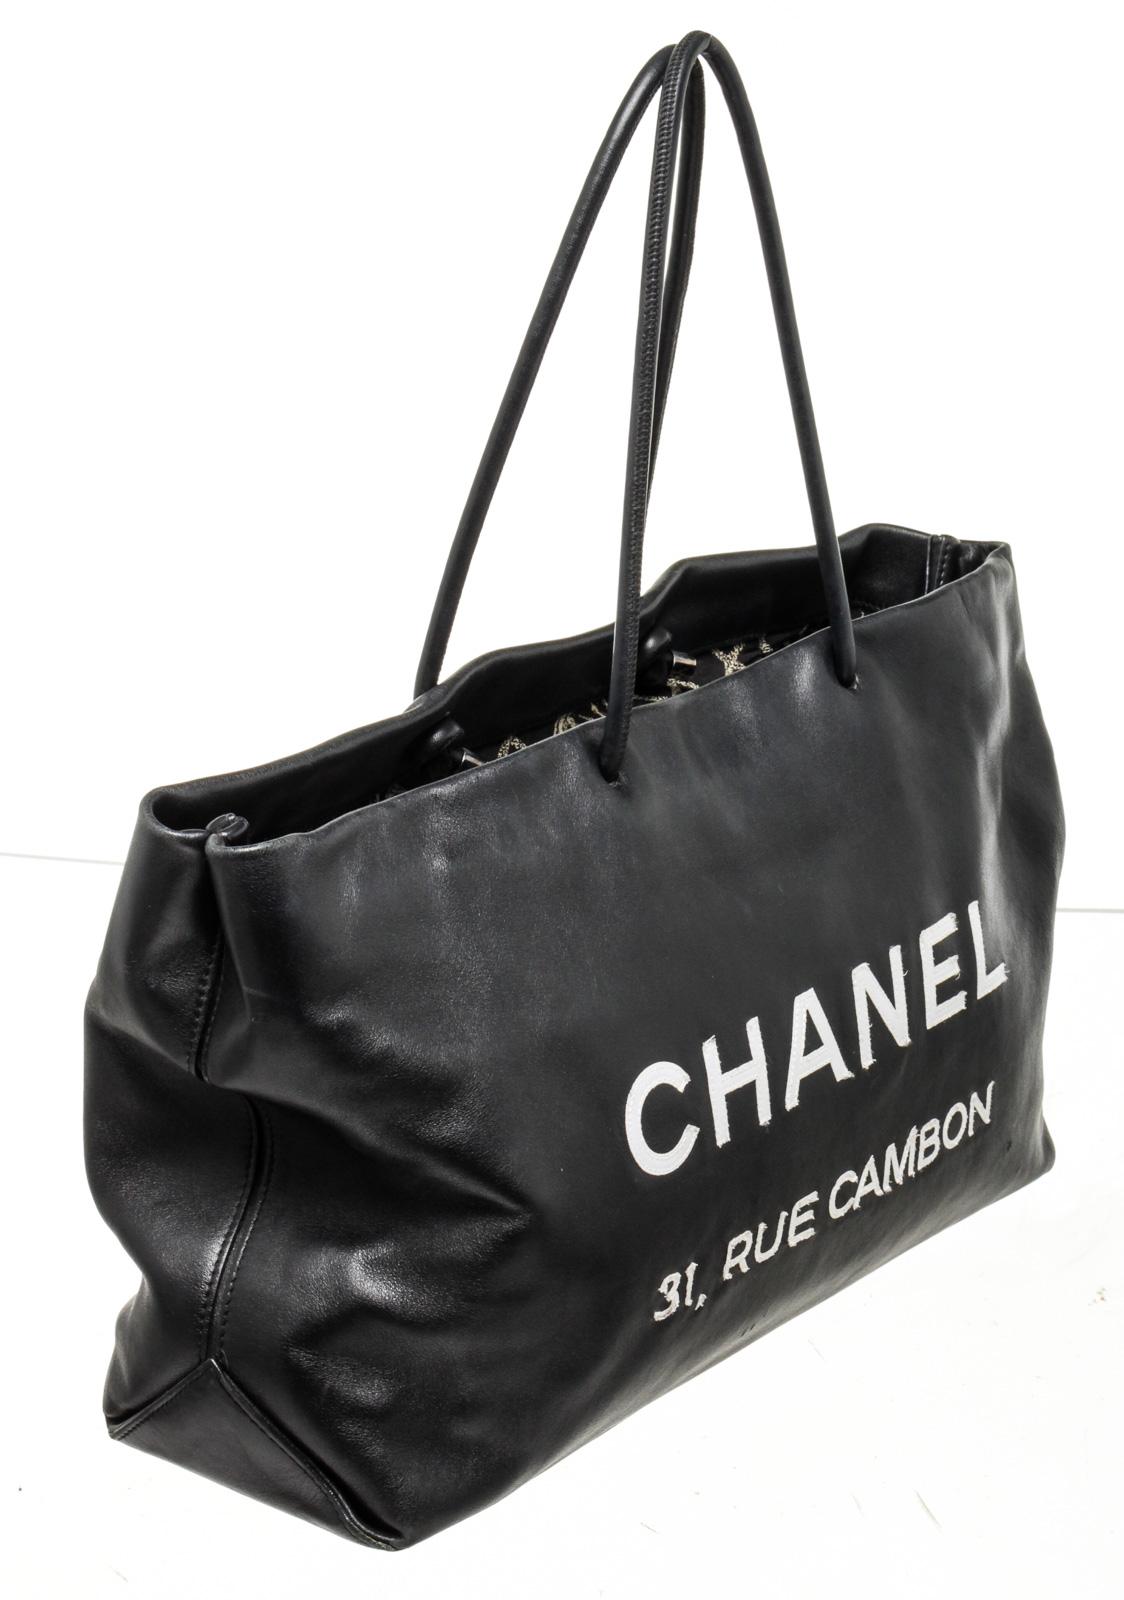 Chanel Black Leather Rue Cambon Tote Bag with leather, gold-toneÂ hardware, interior slip pockets, shoulder strapÂ and zipperÂ closure.

47194MSC